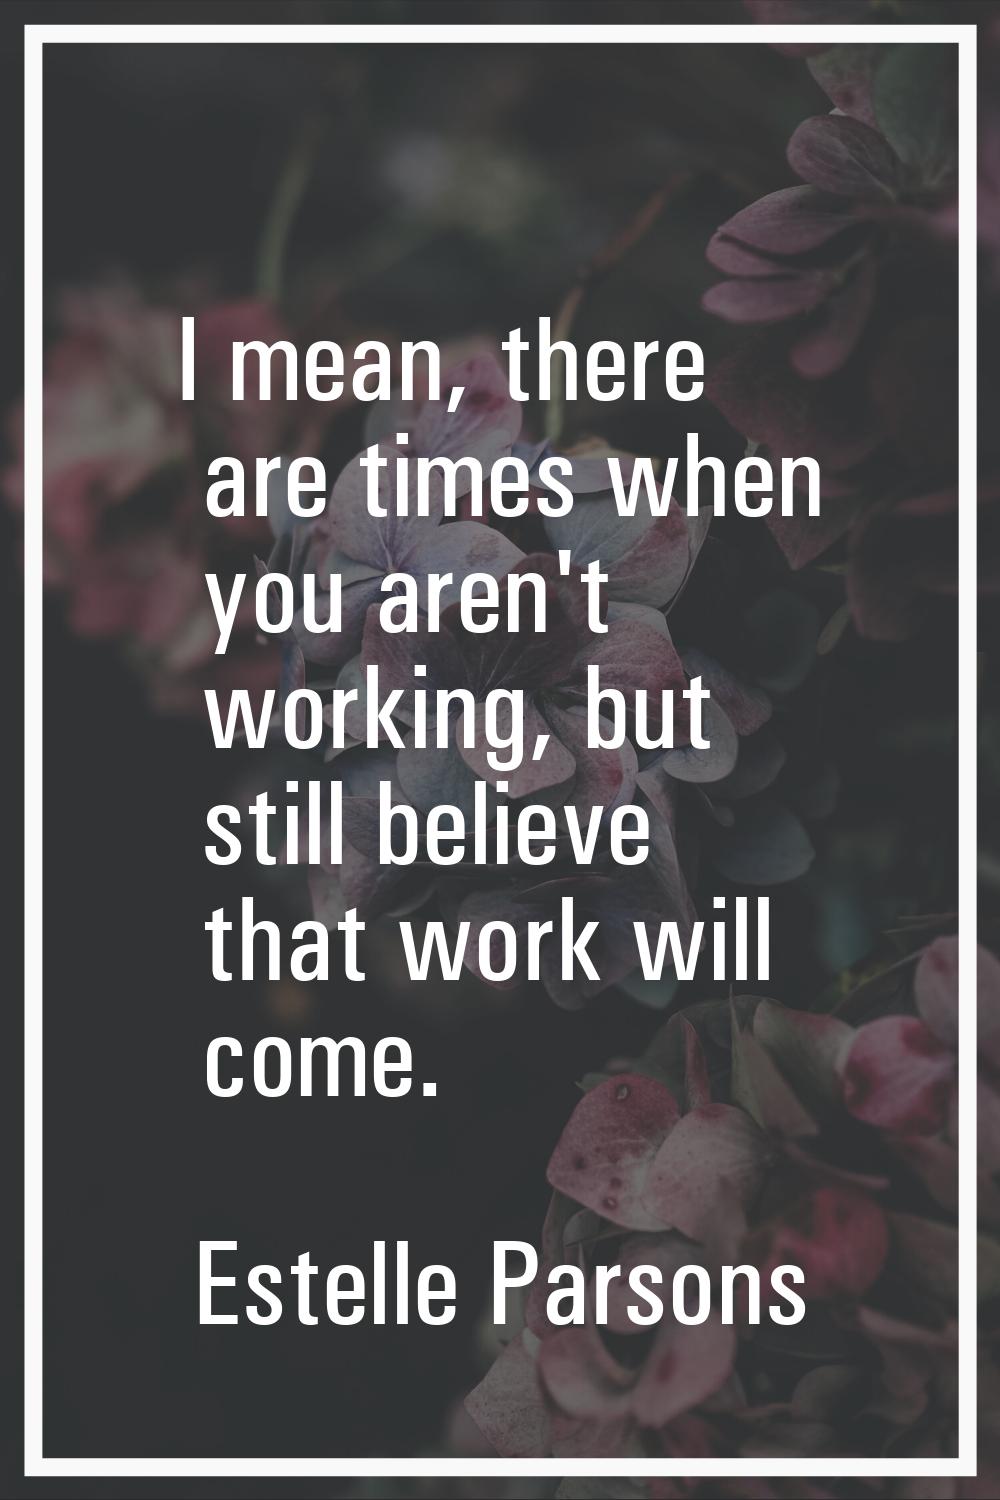 I mean, there are times when you aren't working, but still believe that work will come.